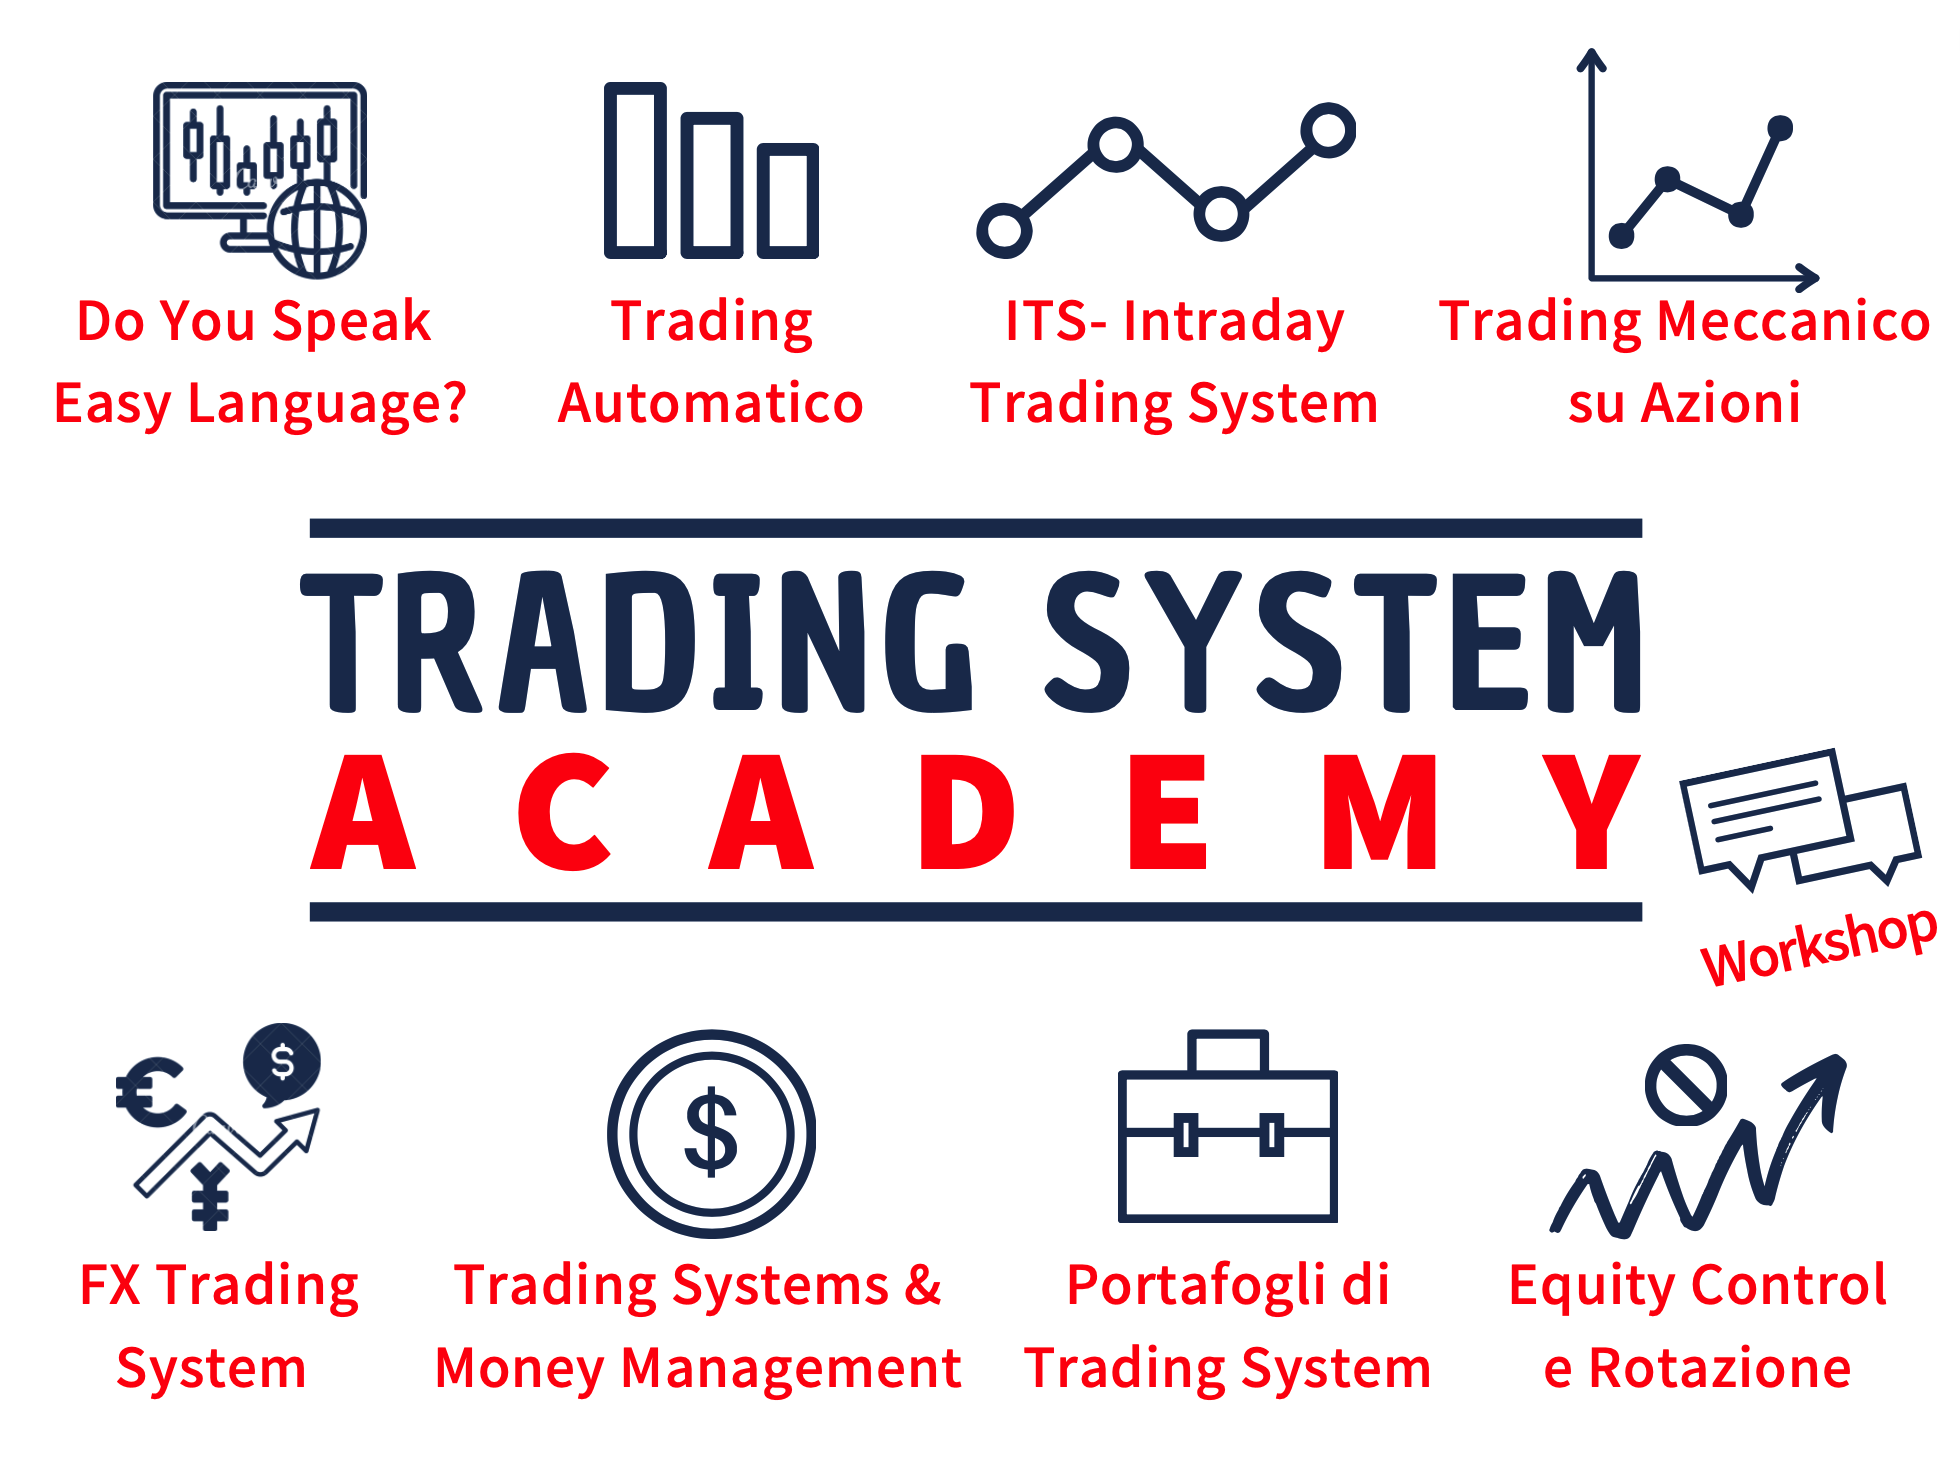 Trading System Academy